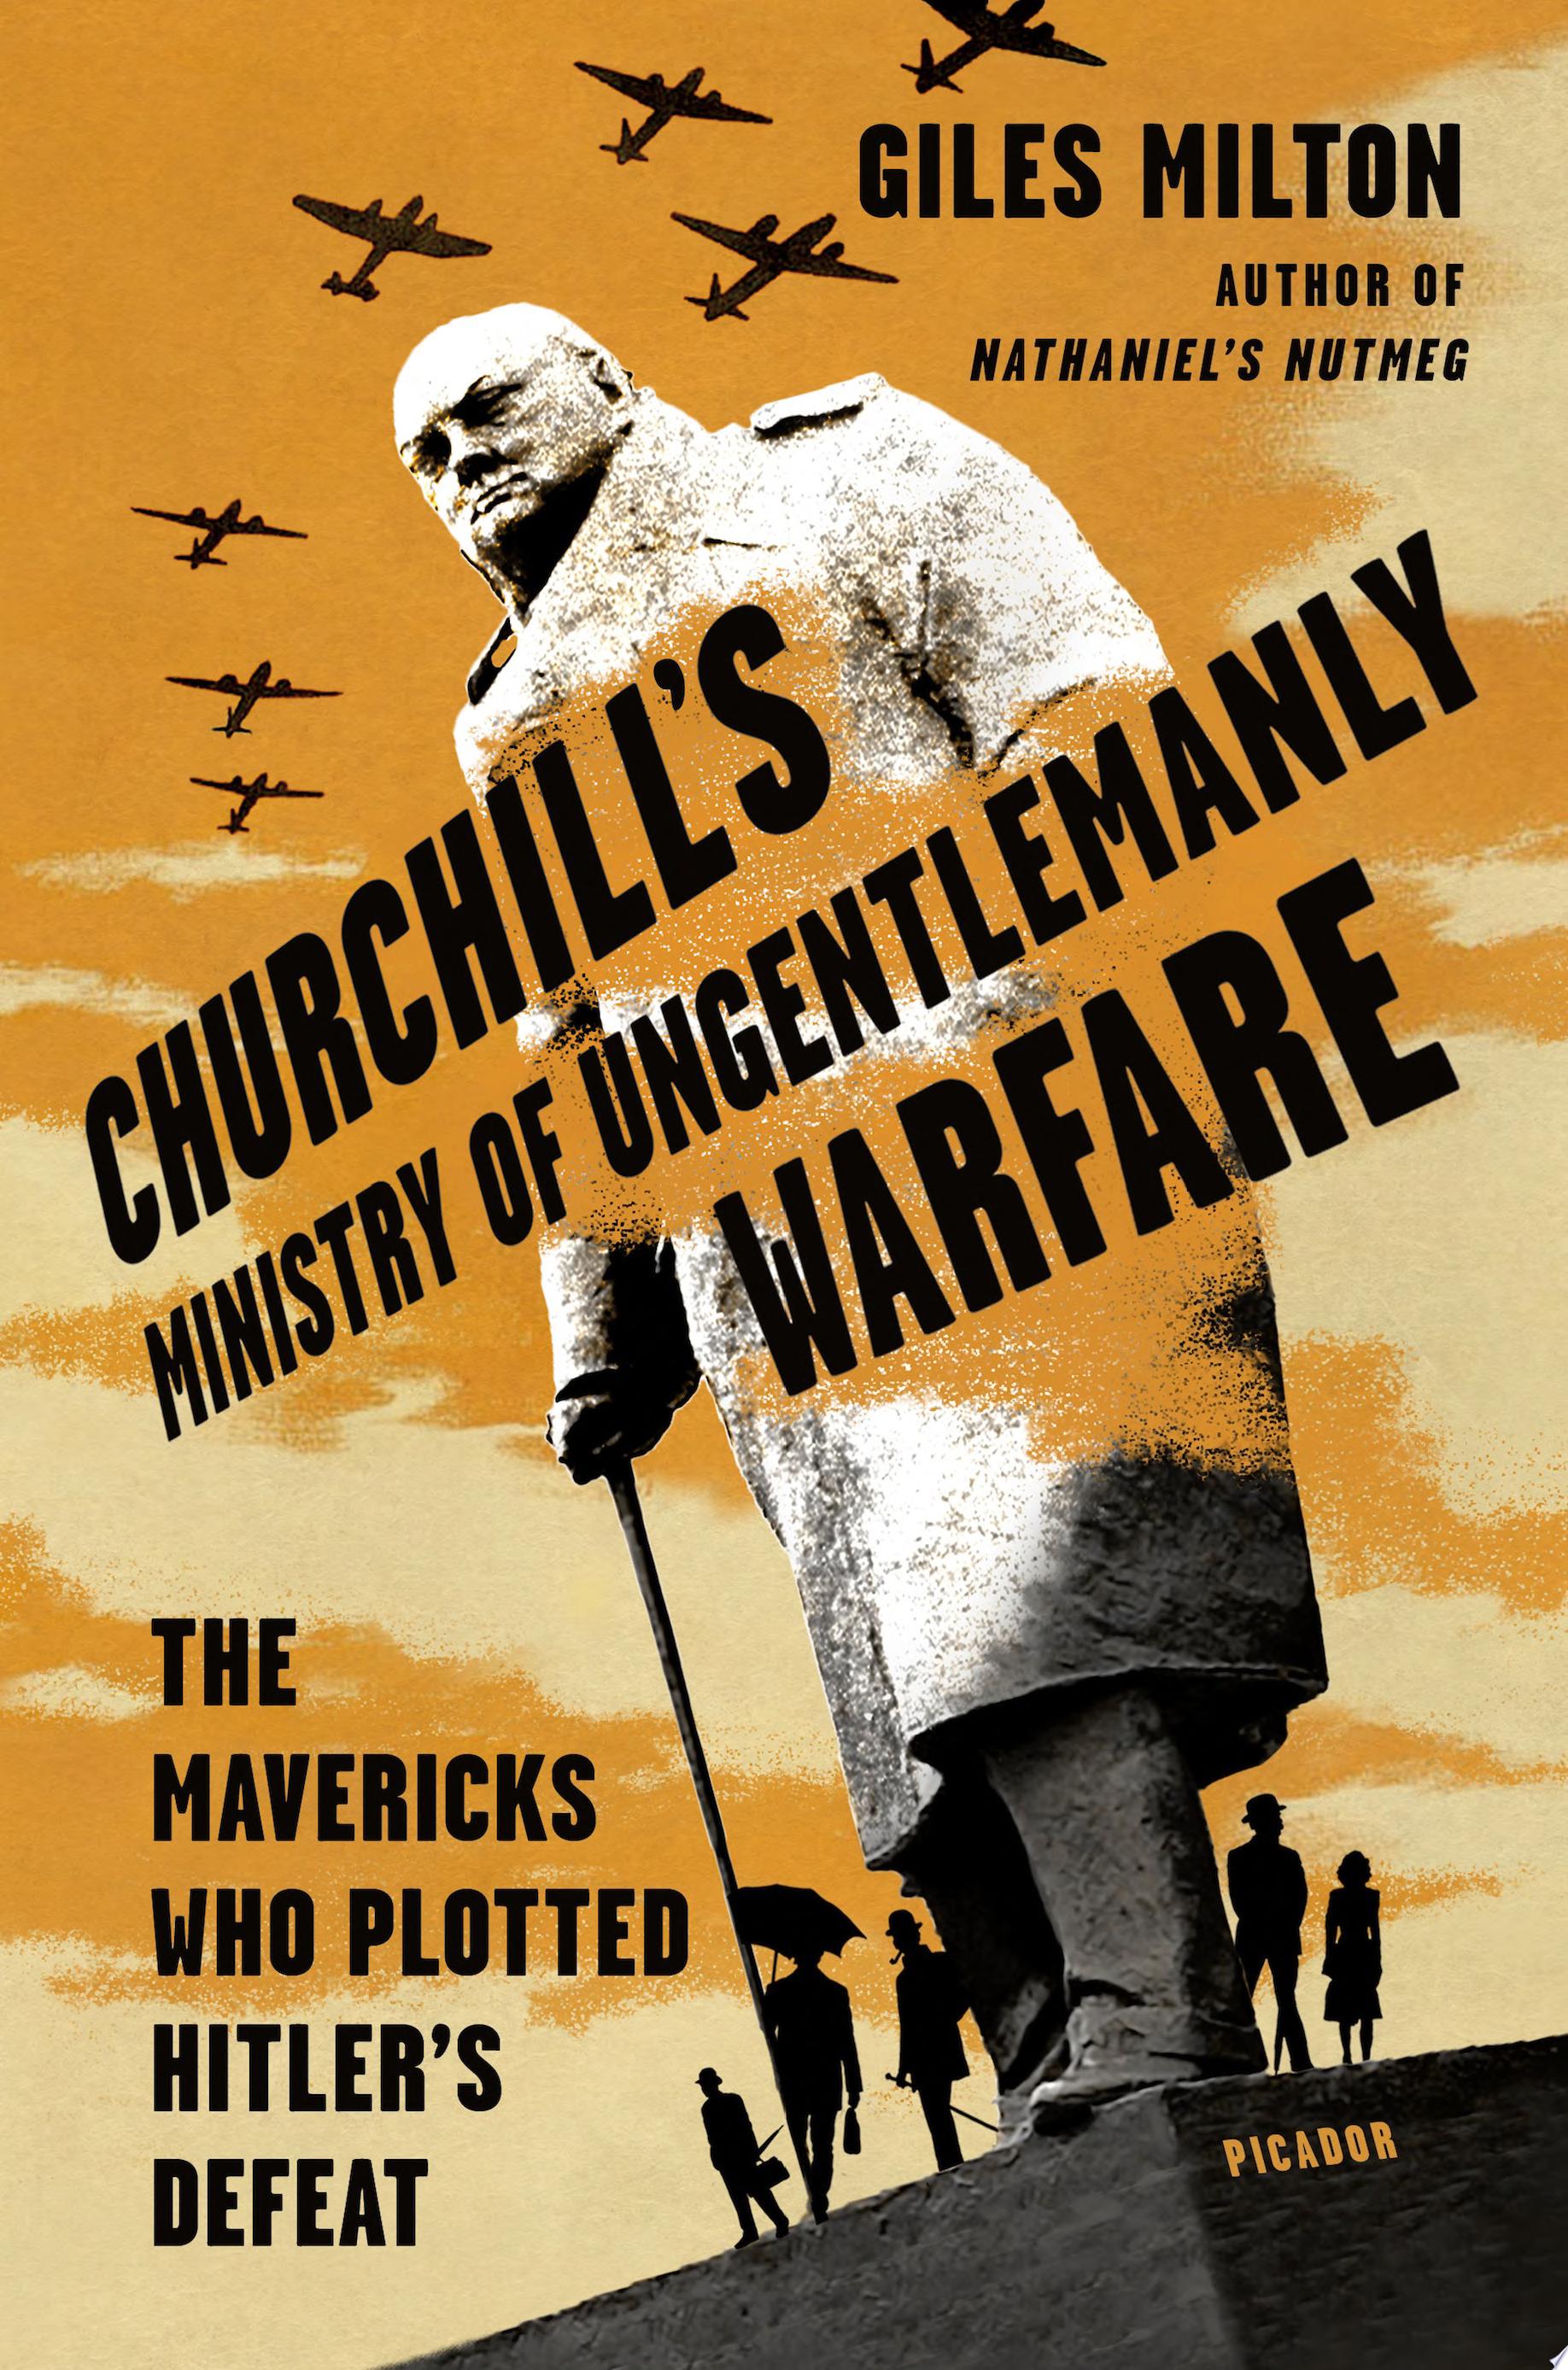 Image for "Churchill's Ministry of Ungentlemanly Warfare"